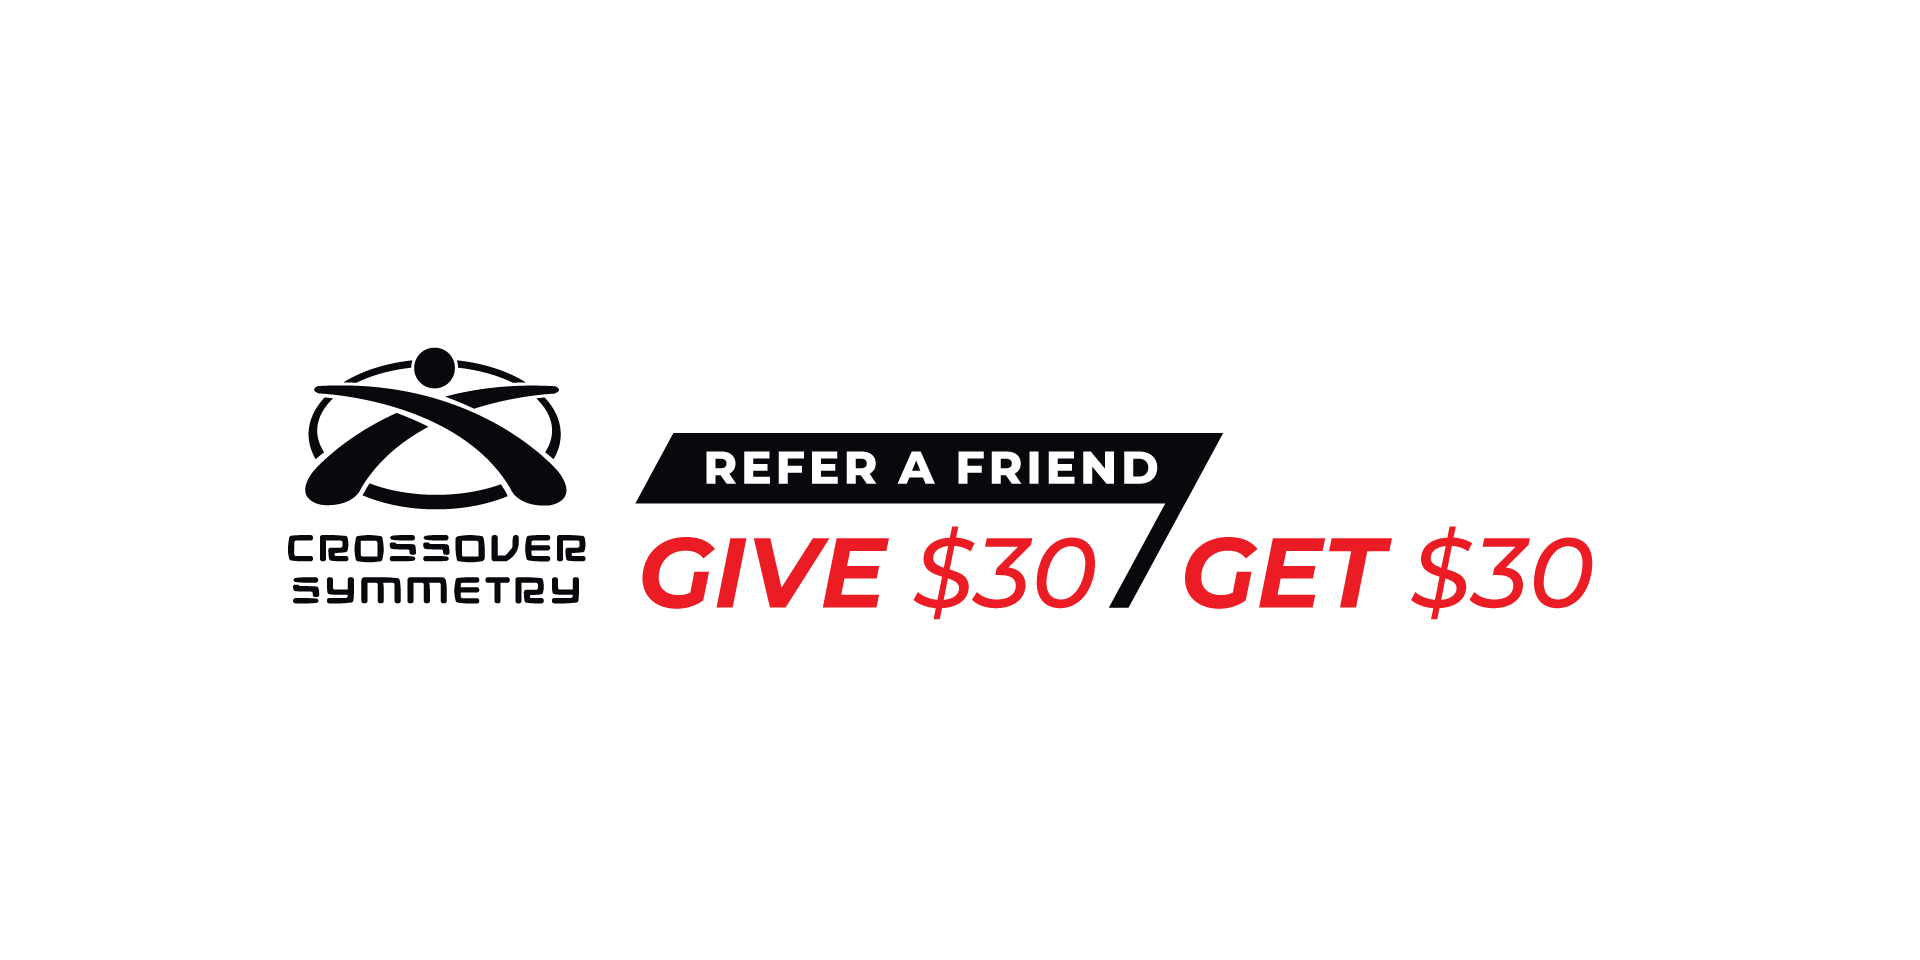 Refer a friend banner image